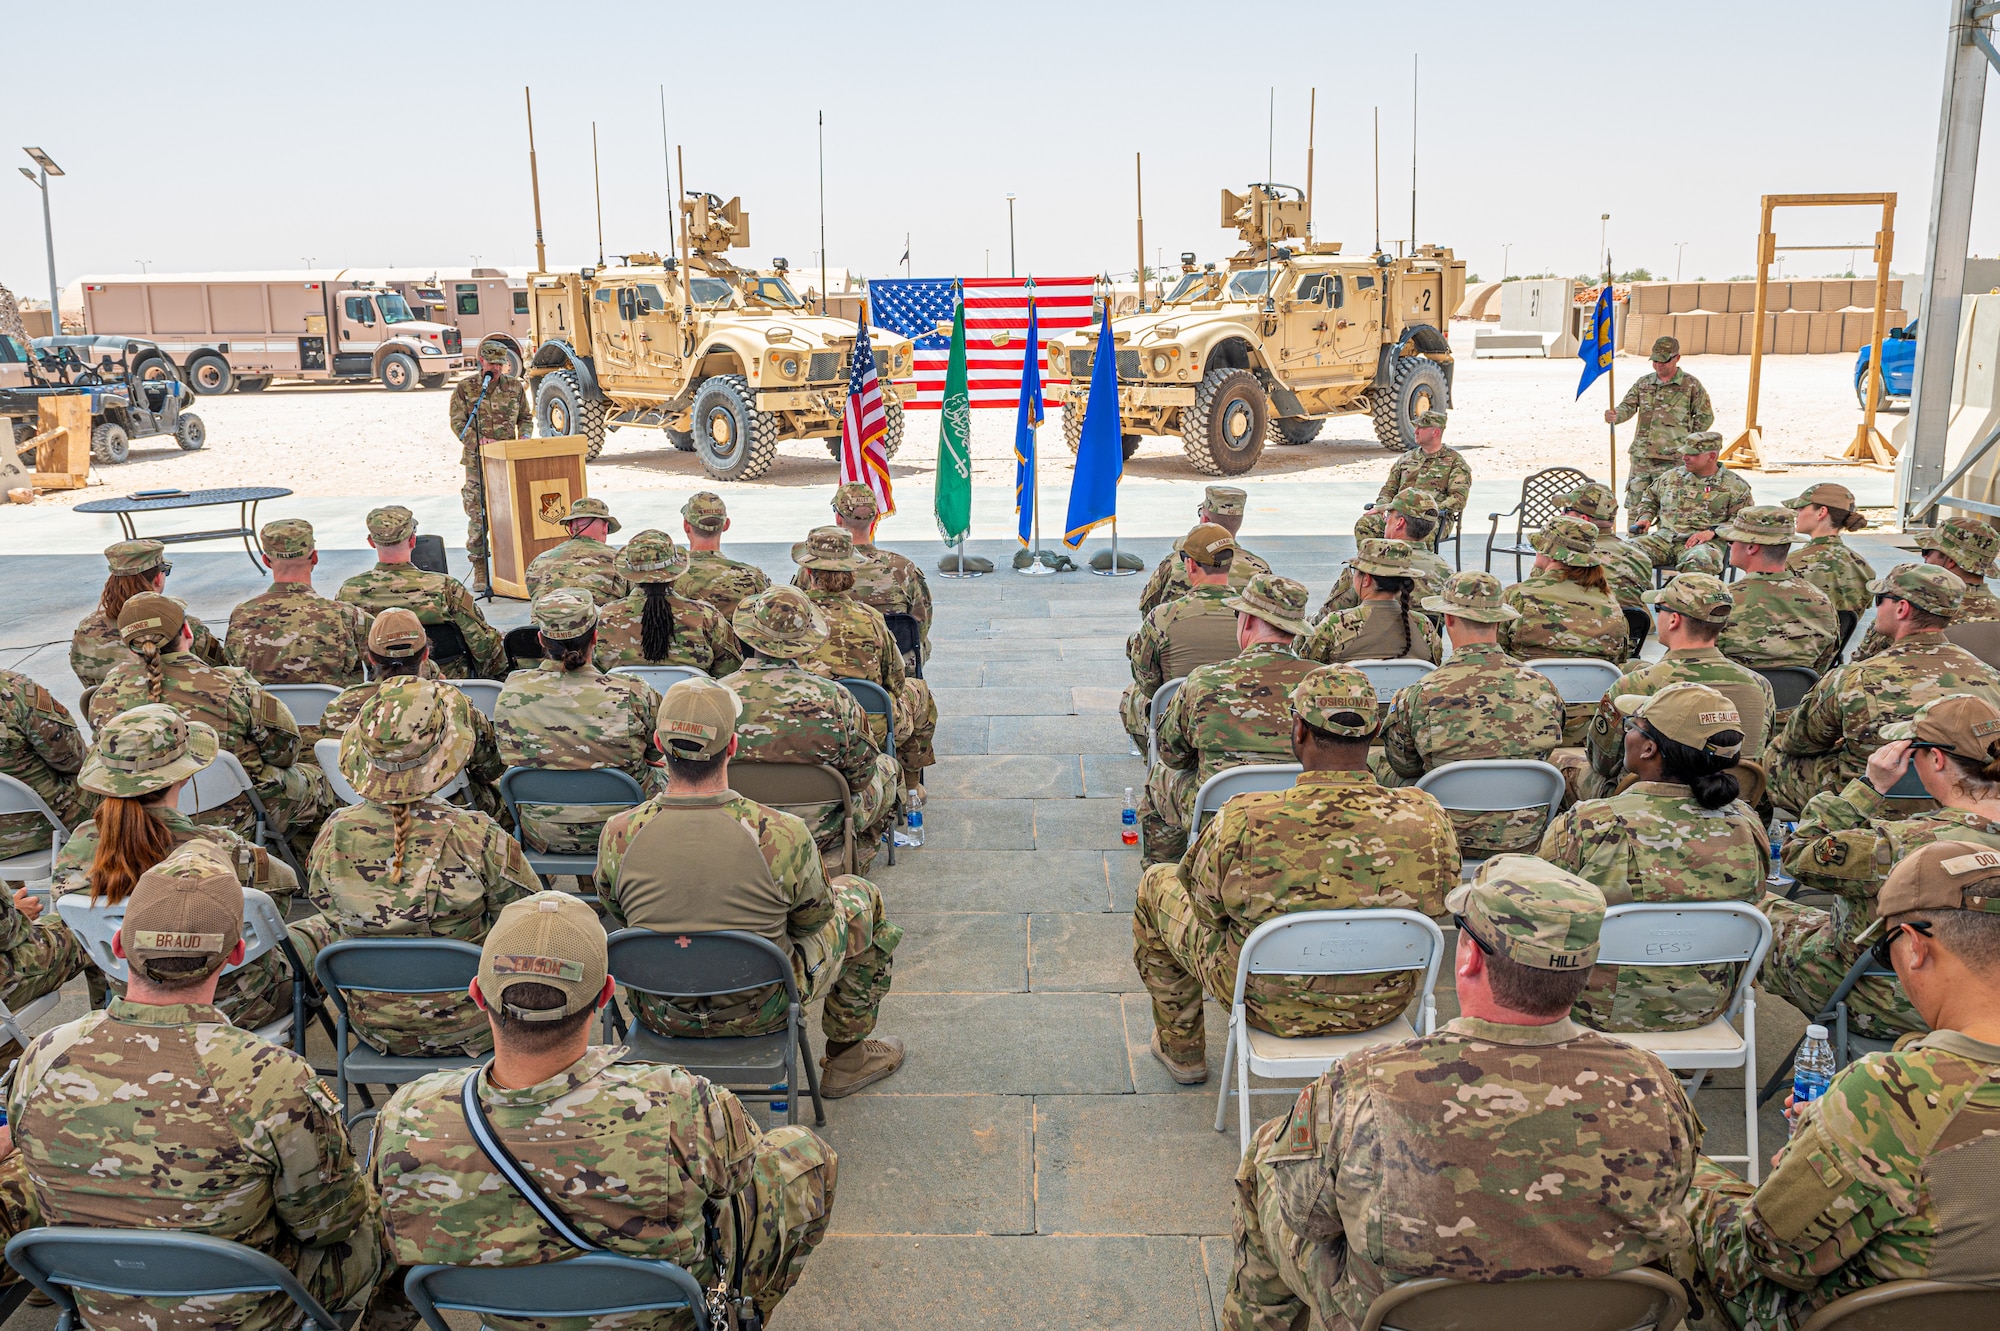 Col Zavadil takes command of the 378th EMDS